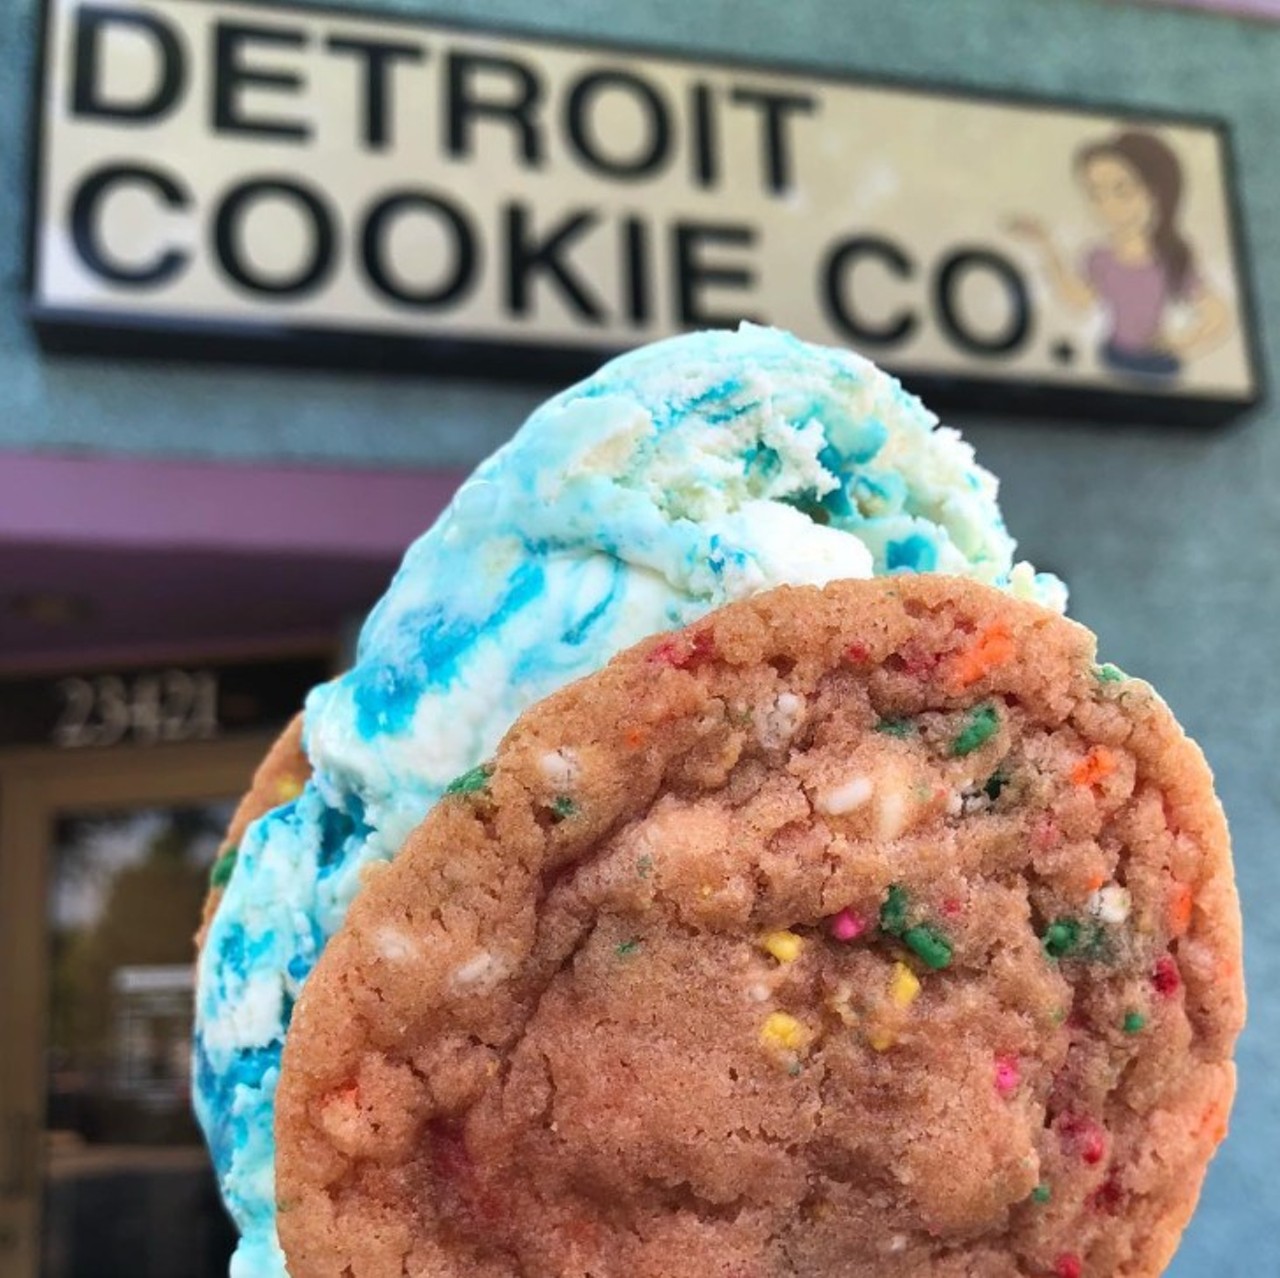 @detroitcookiecompany
23421 Woodward Ave, Ferndale
Detroit Cookie Company makes life a little sweeter with its freshly baked cookies and treats.